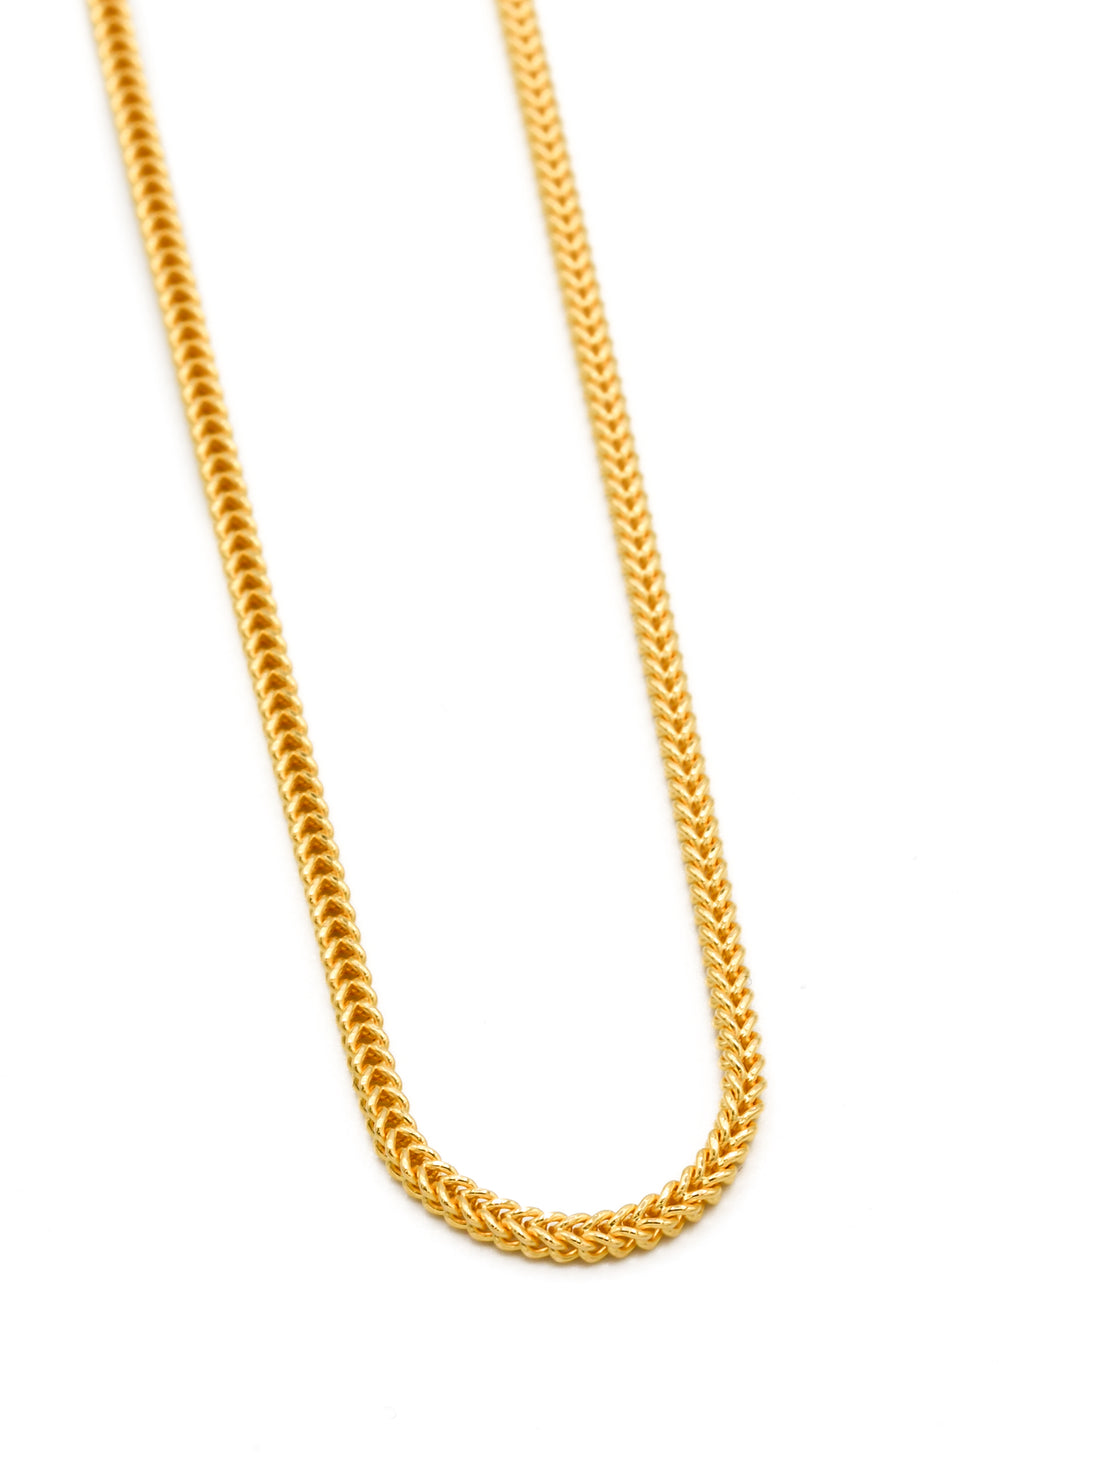 22ct Gold Hollow Fox Tail Chain - Roop Darshan